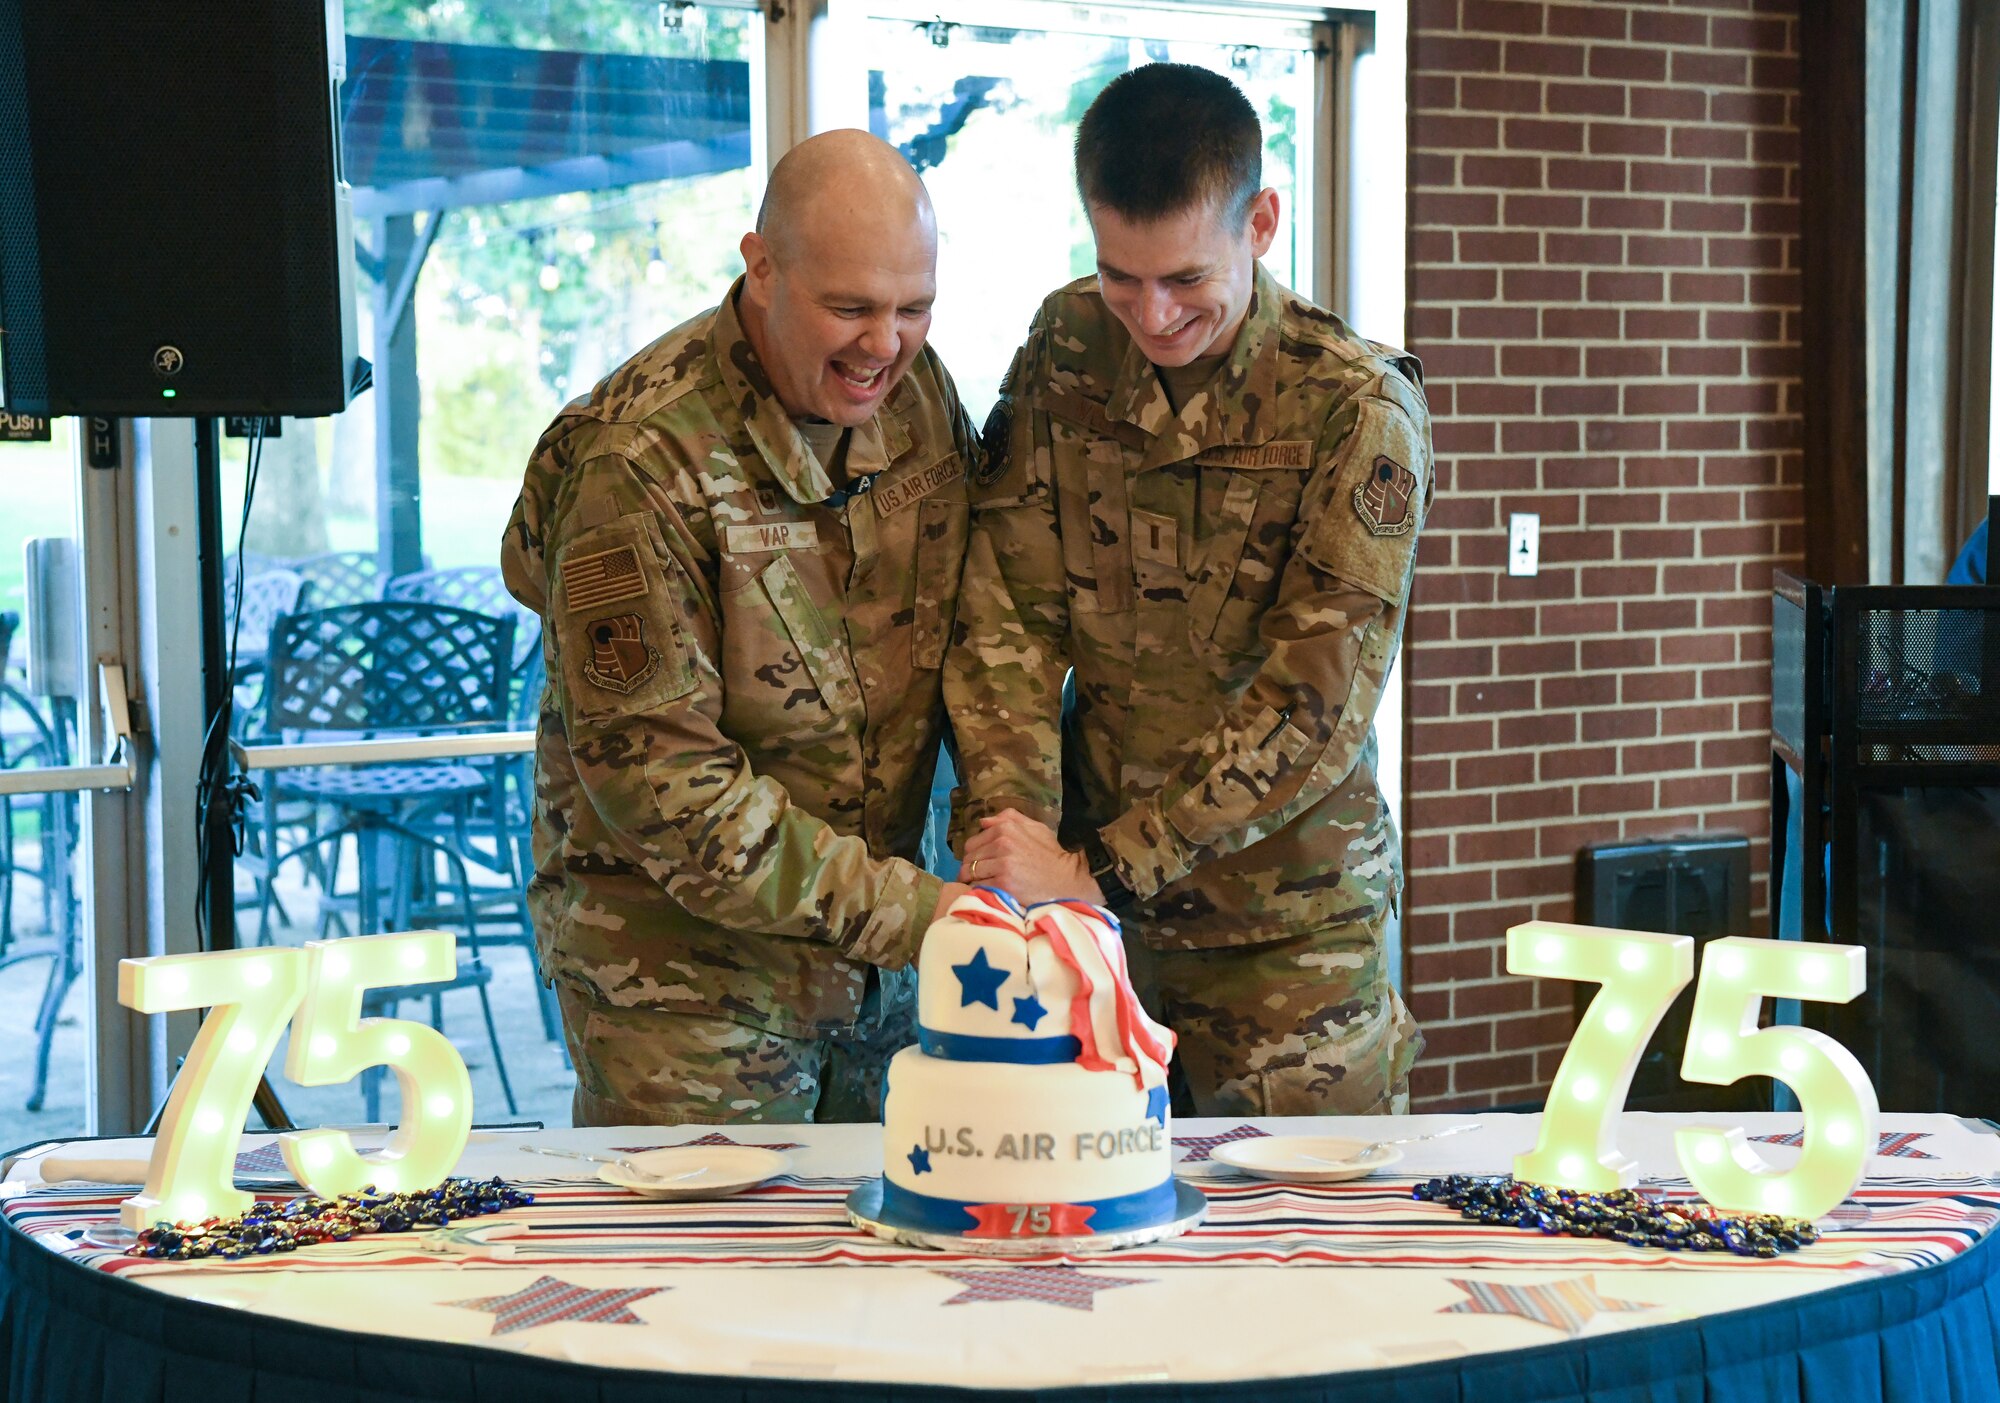 Two Airman cutting a cake with a sword